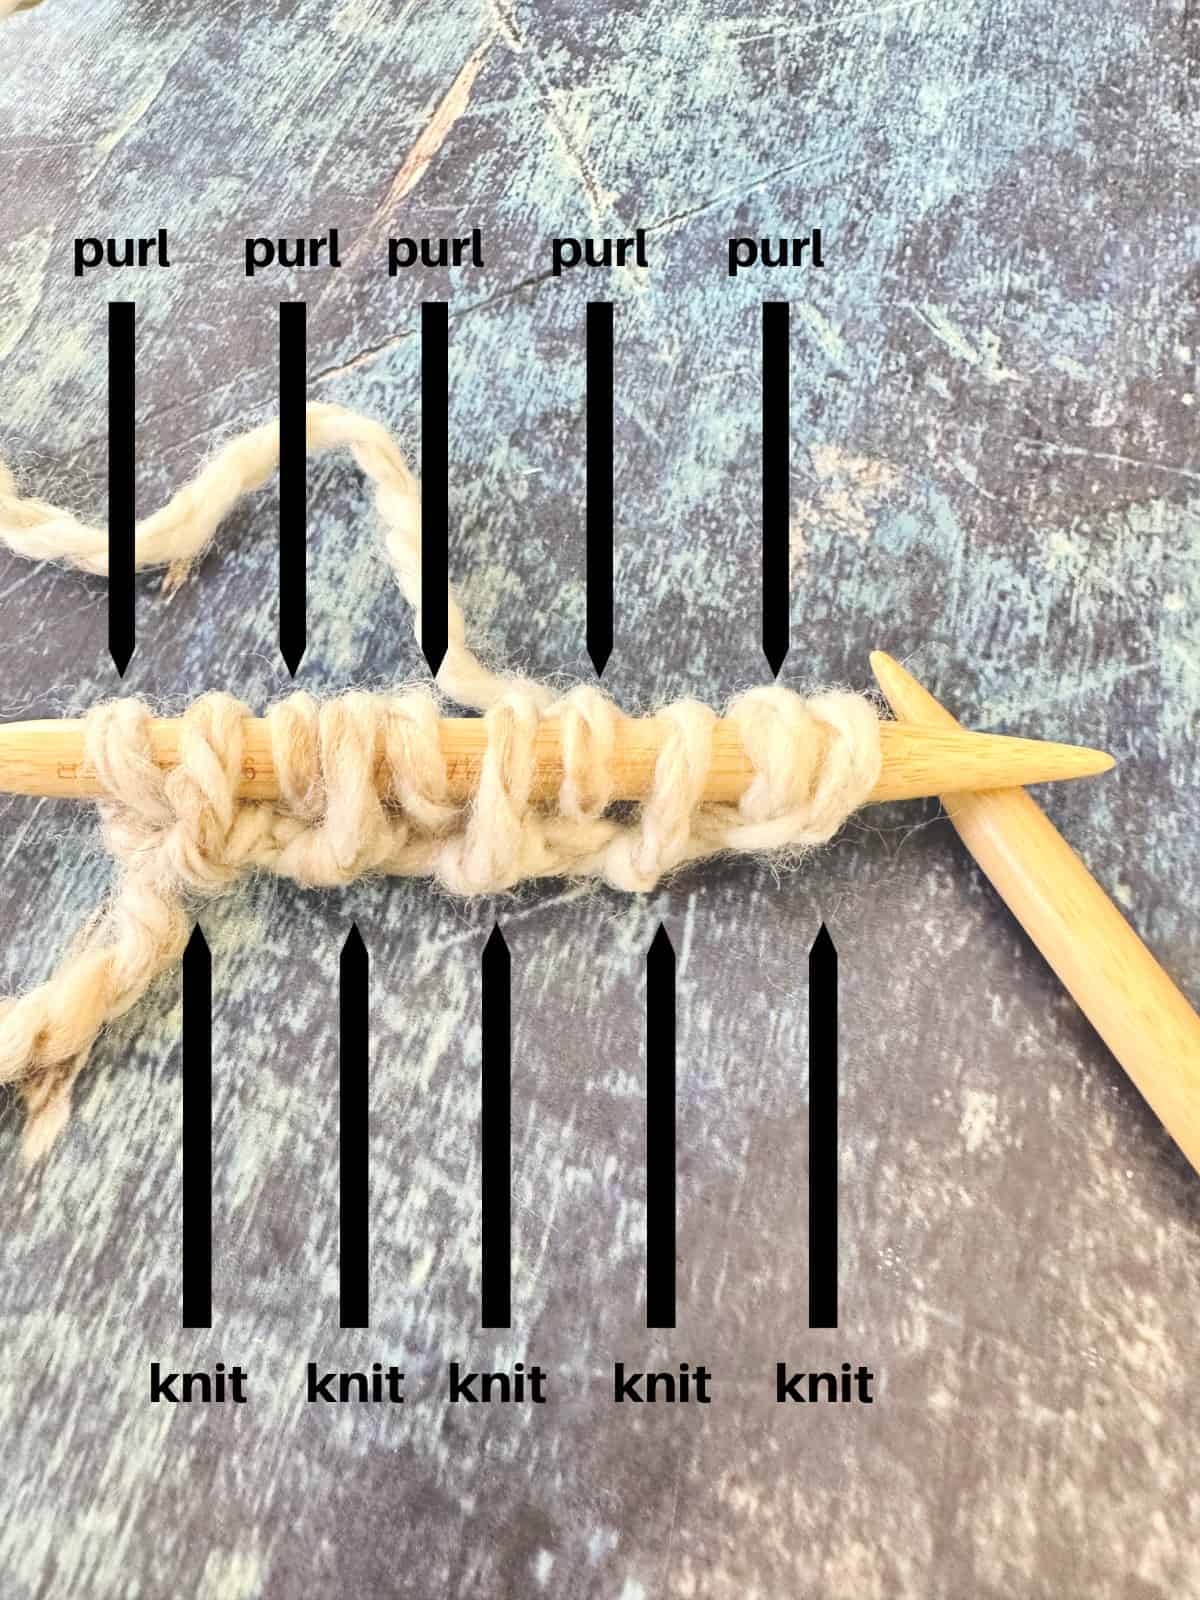 Stitches labeled with purl or knit for alternating cable cast on.